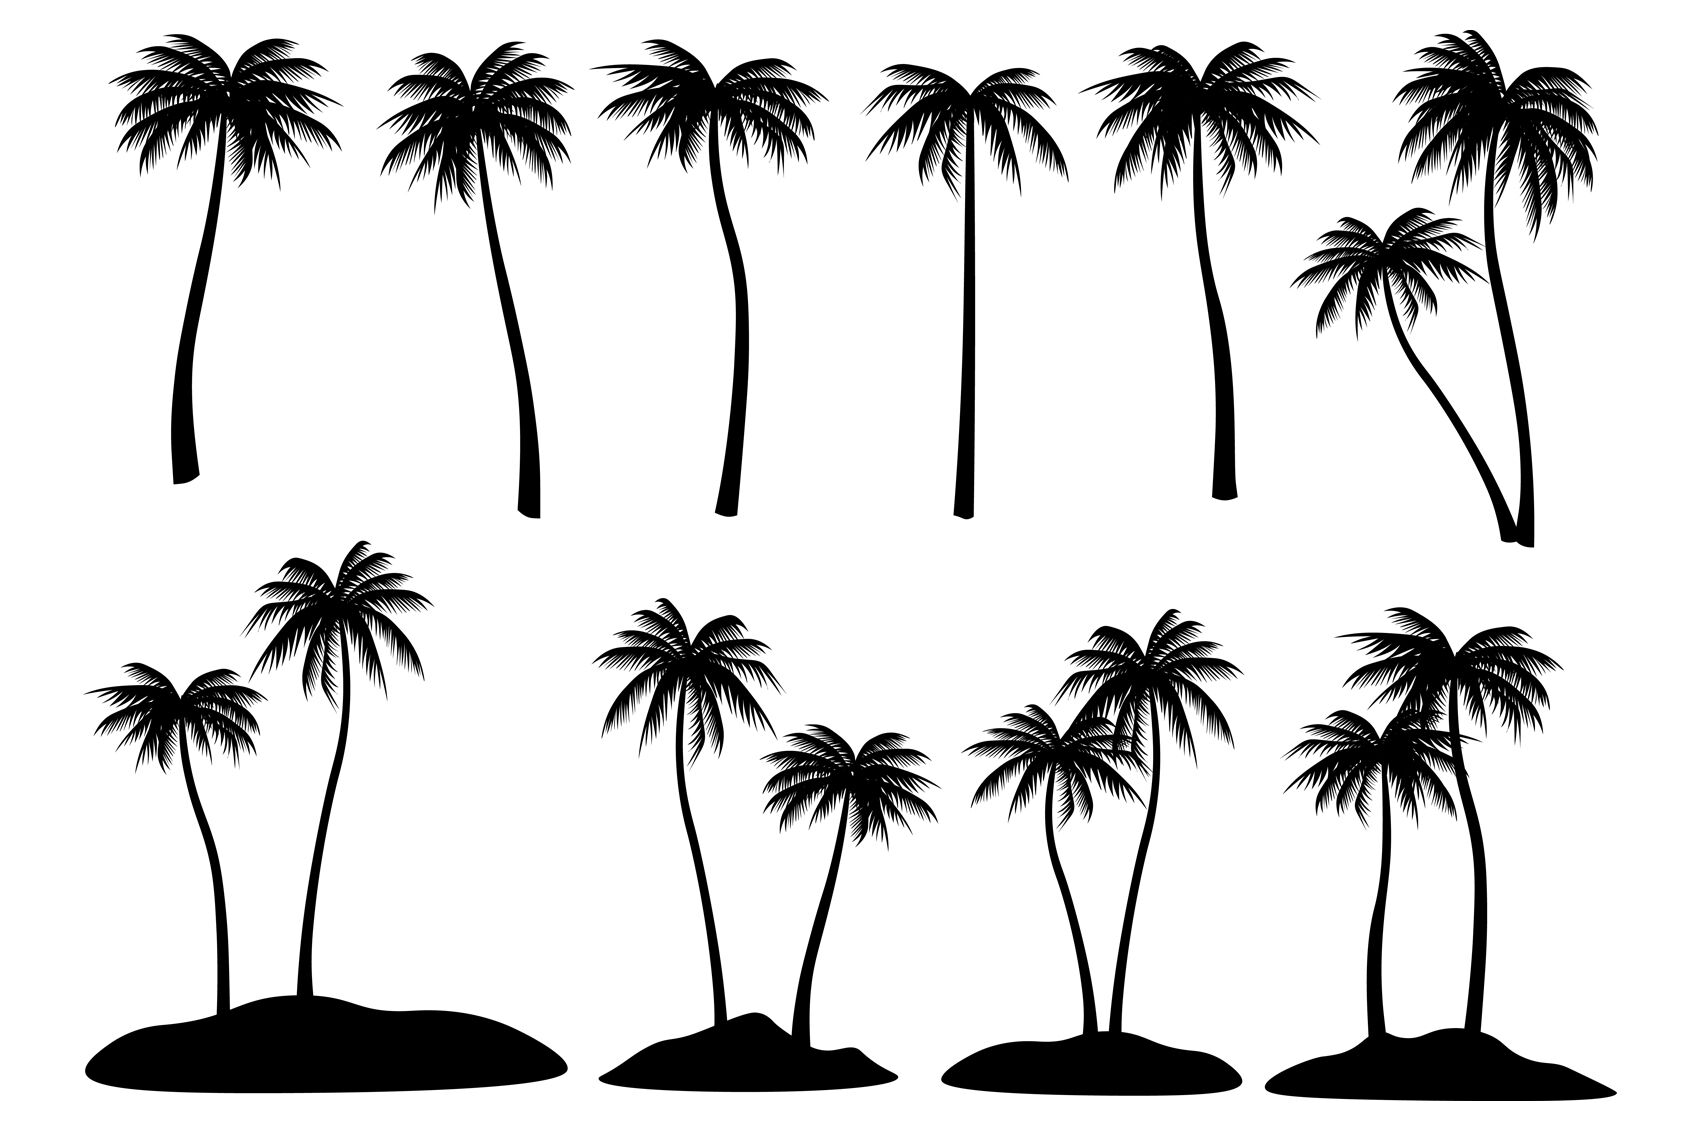 palm trees silhouette